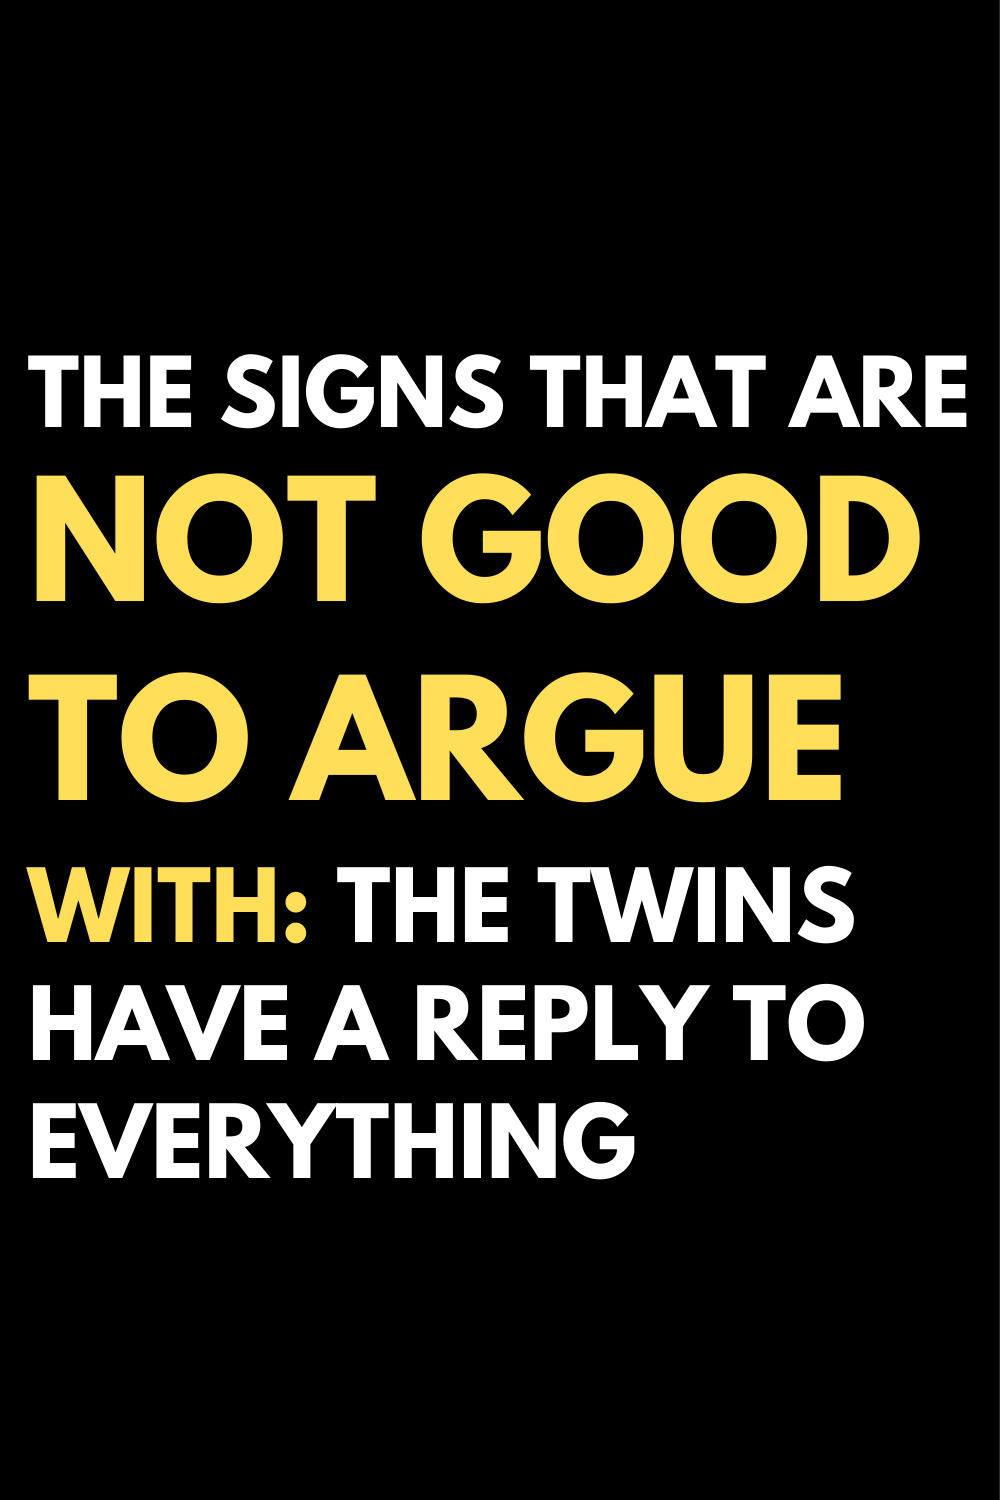 The signs that are not good to argue with: The twins have a reply to everything